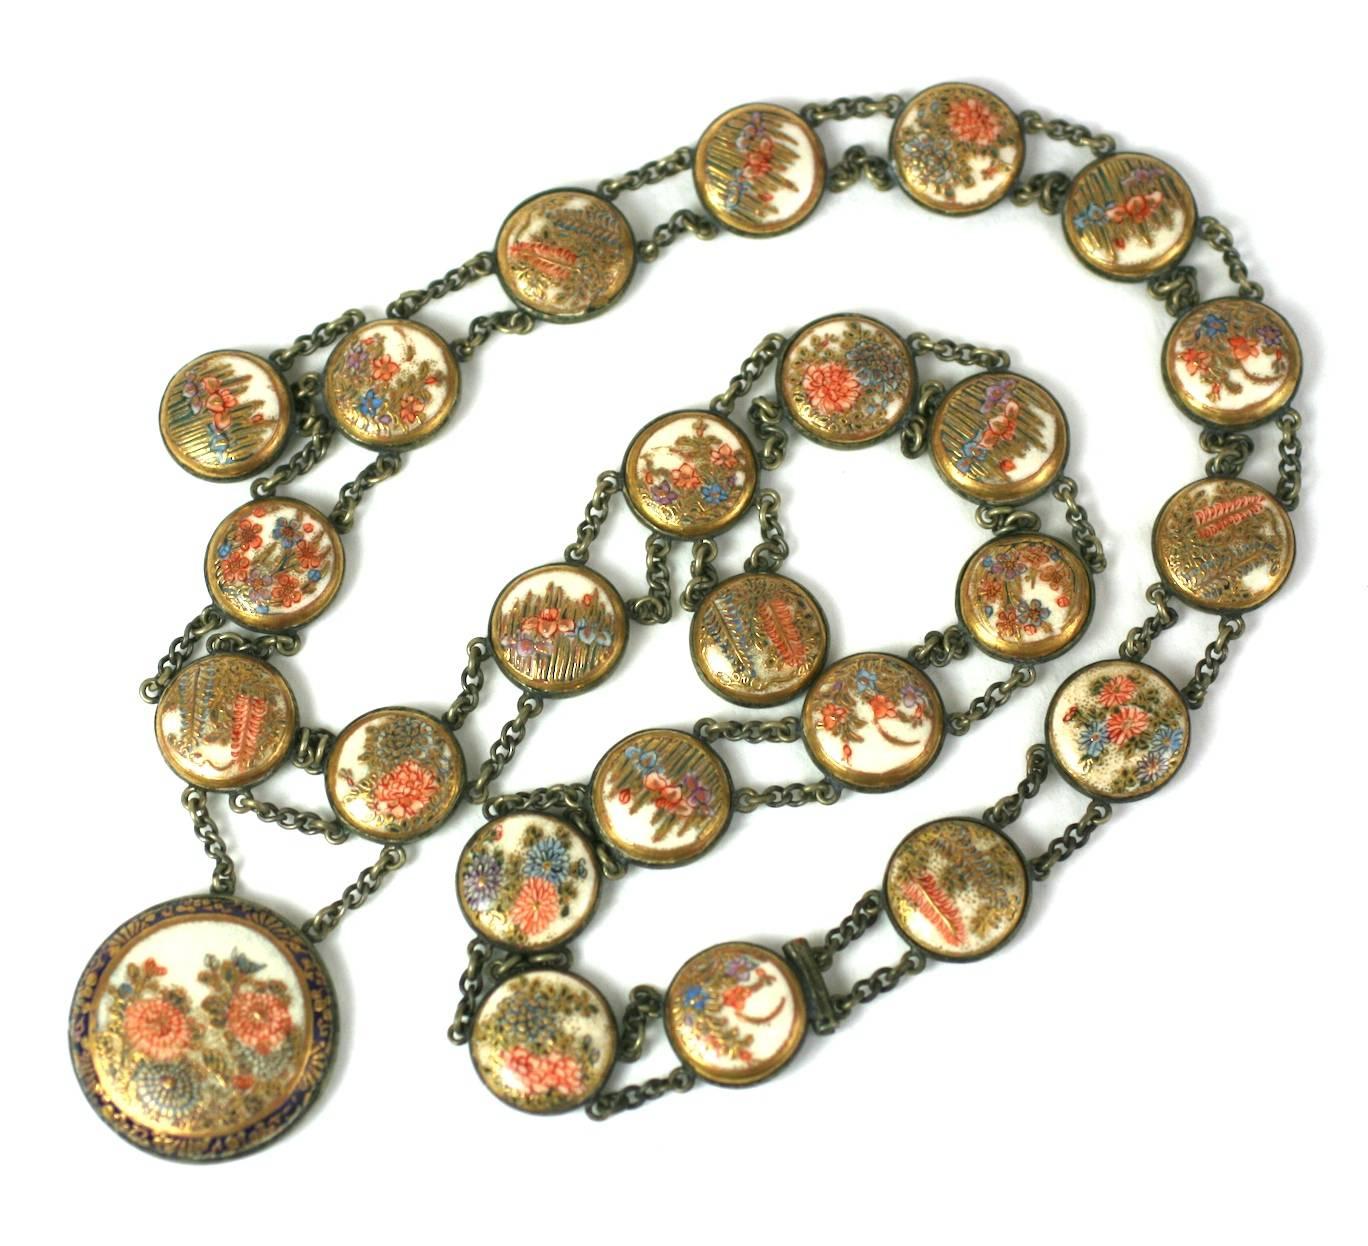 Large and rare 19th Century Satsuma Button Necklace.  Medallions are set in silver metal in a linked chain formation. 1880's Japan. Excellent condition.
24